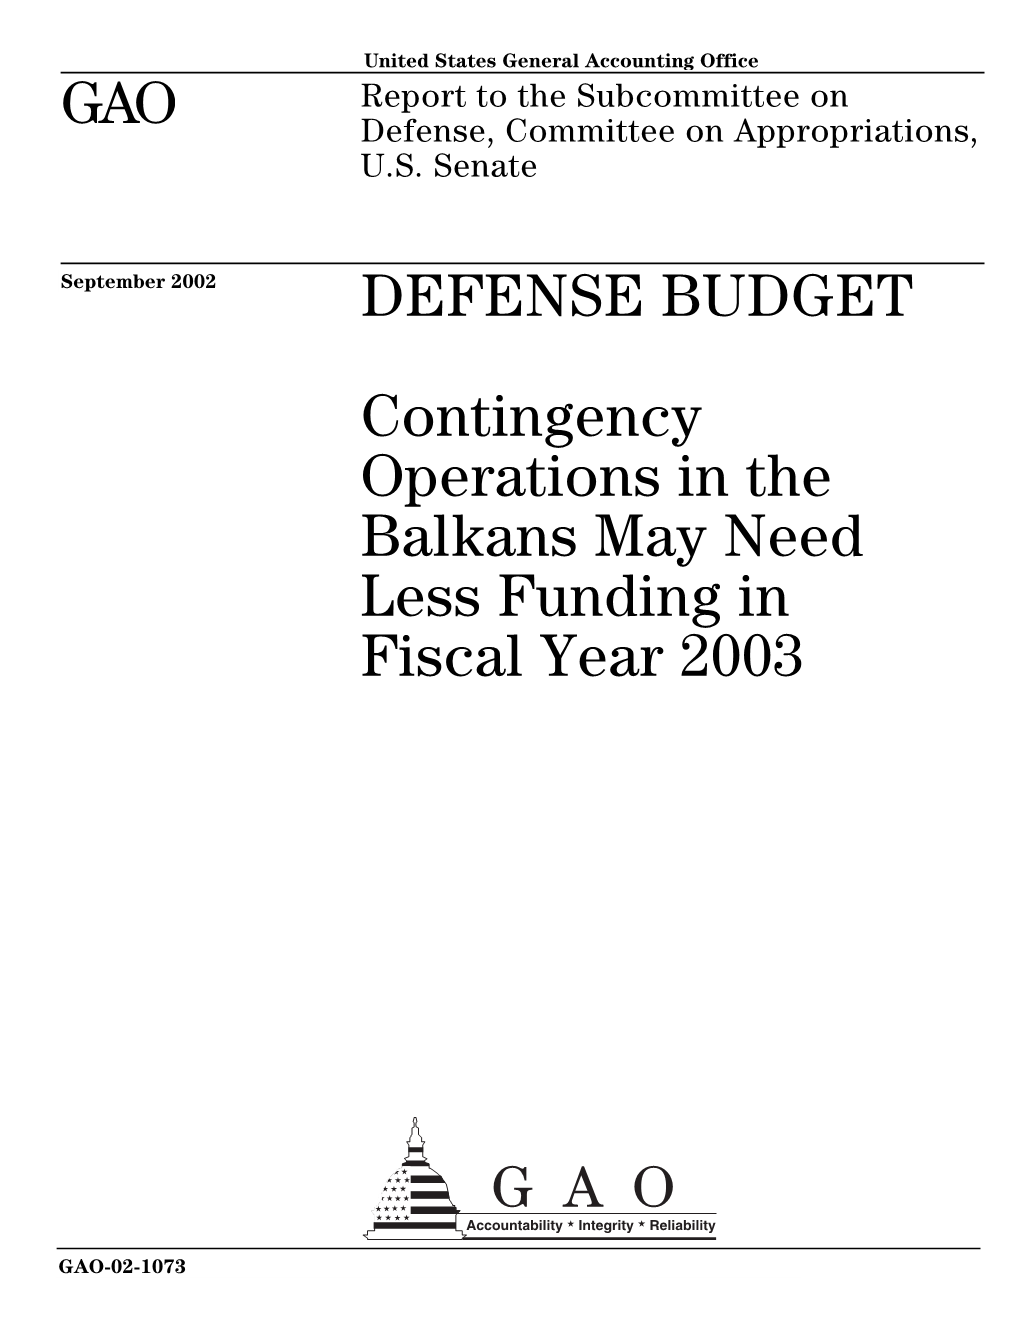 GAO-02-1073 Defense Budget: Contingency Operations in The